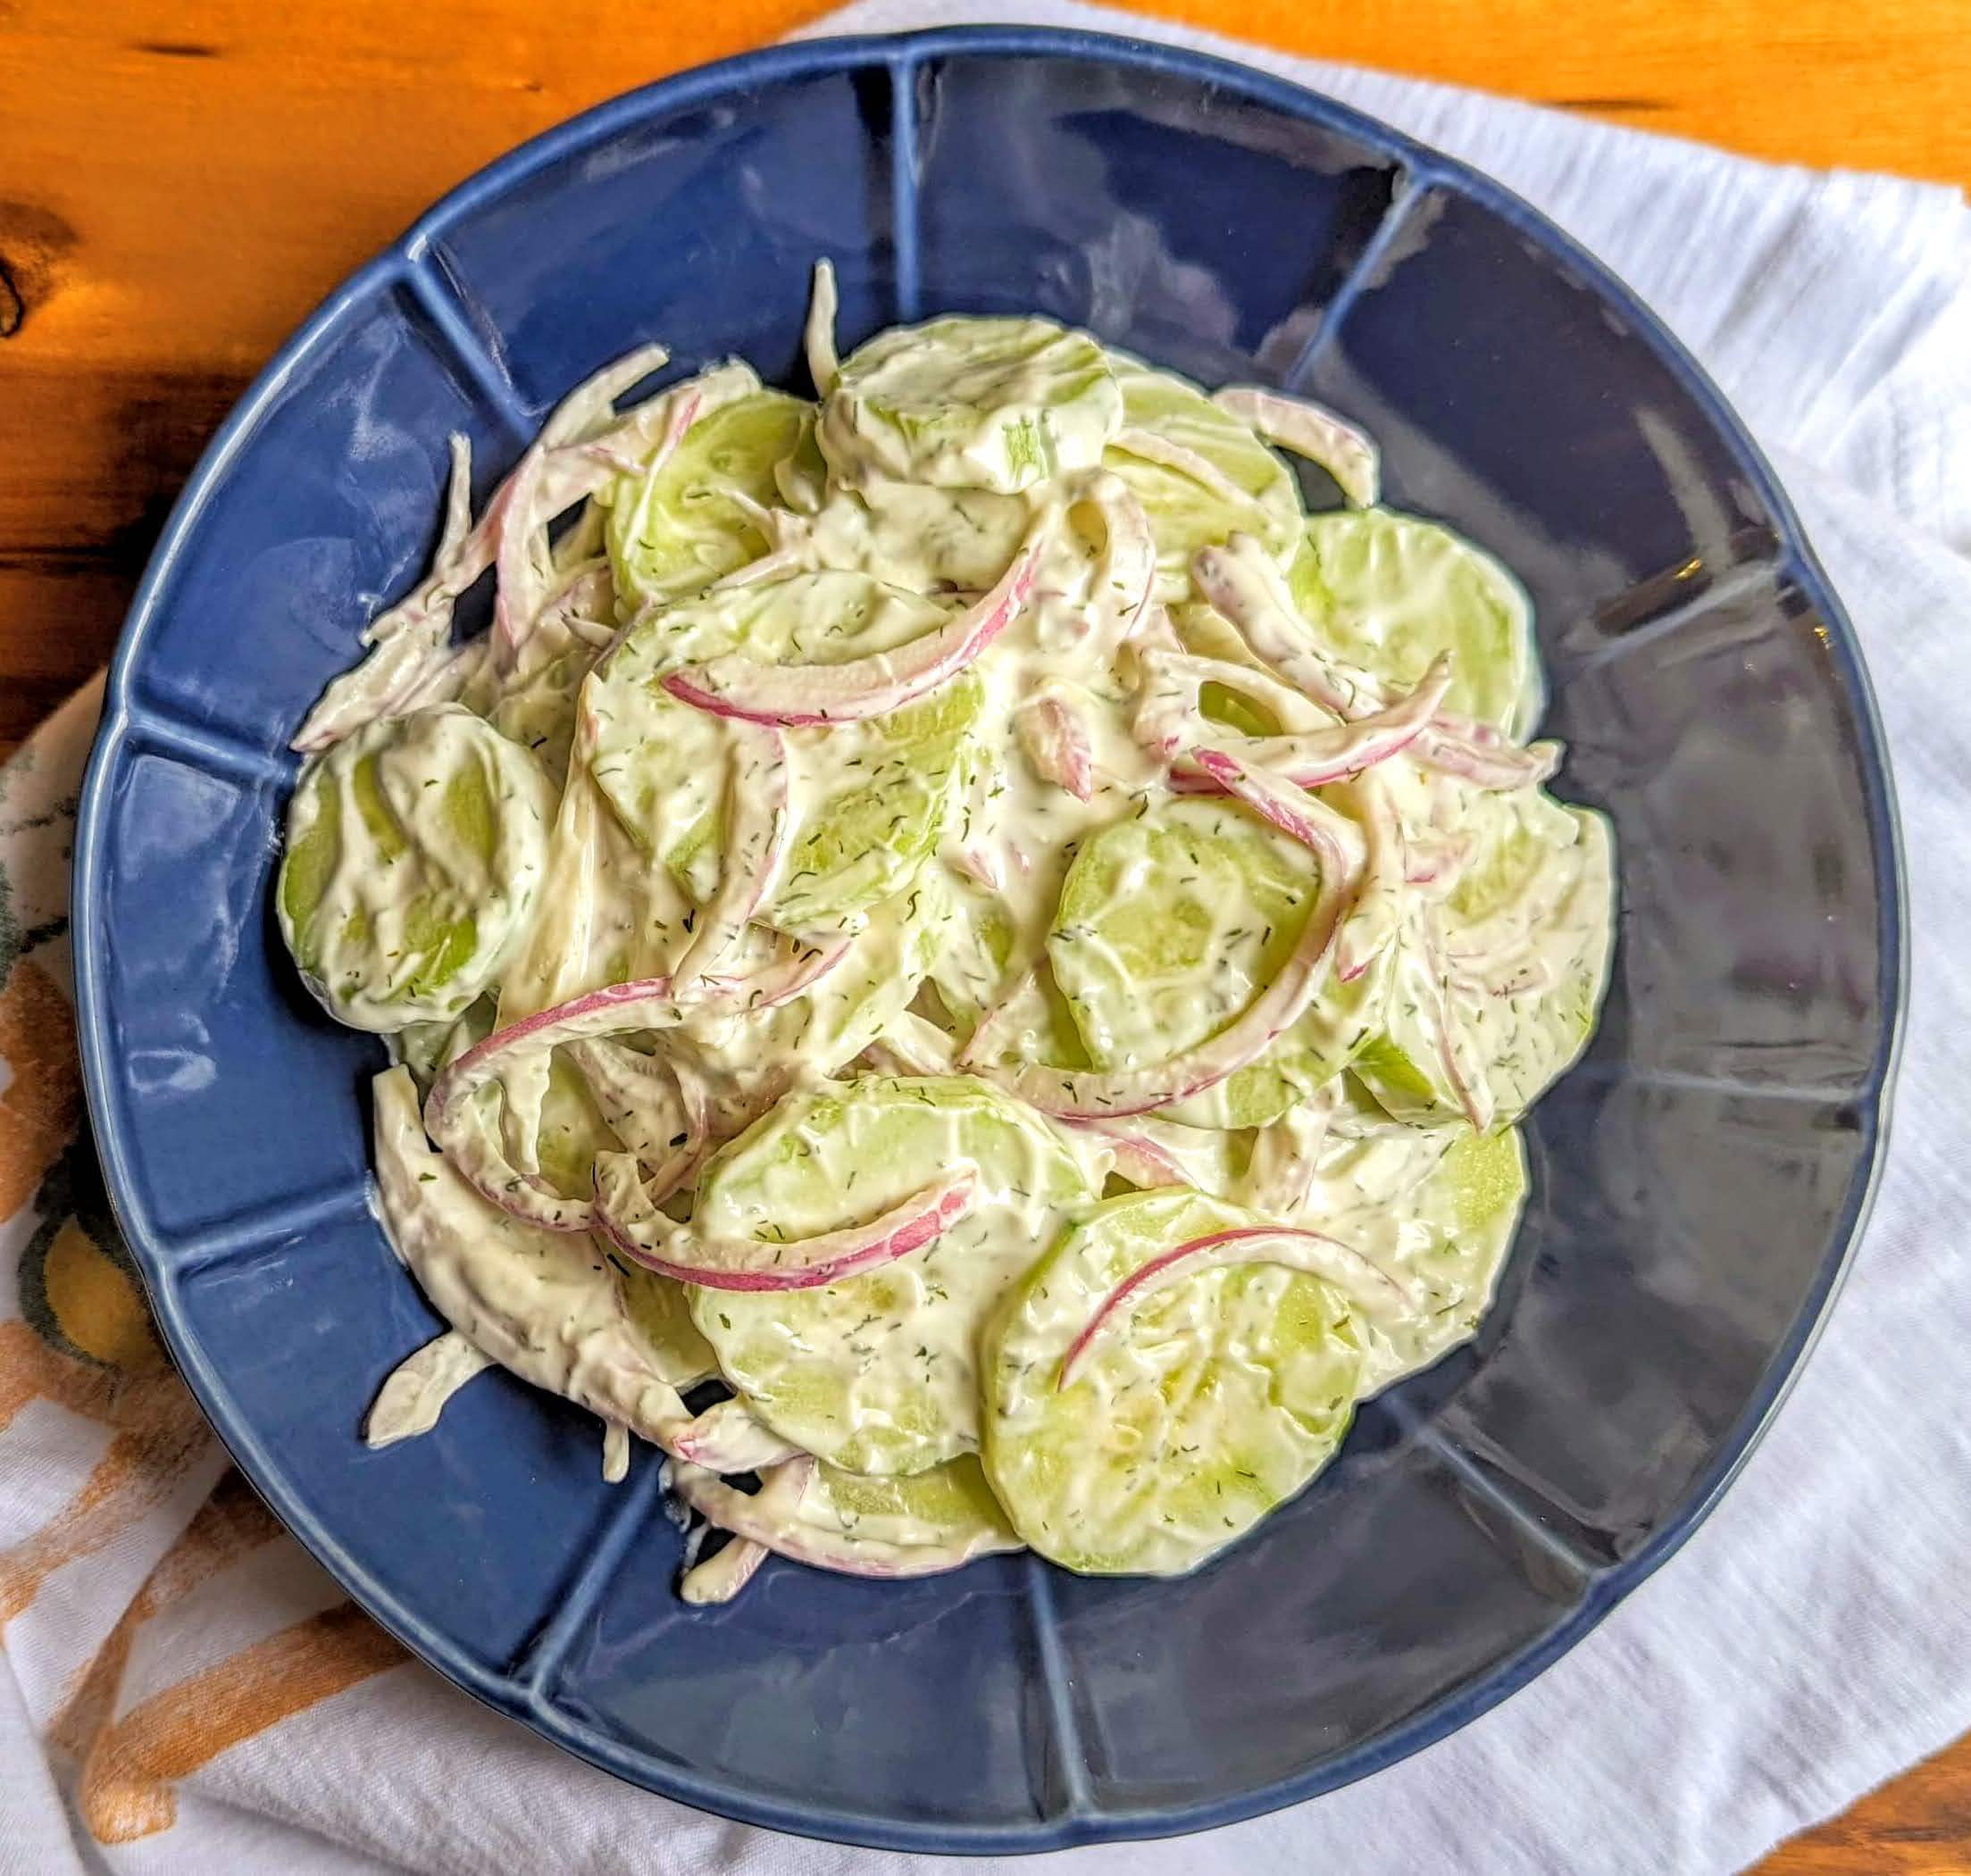 Creamy Cucumber Salad Recipe Step By Step Instructions